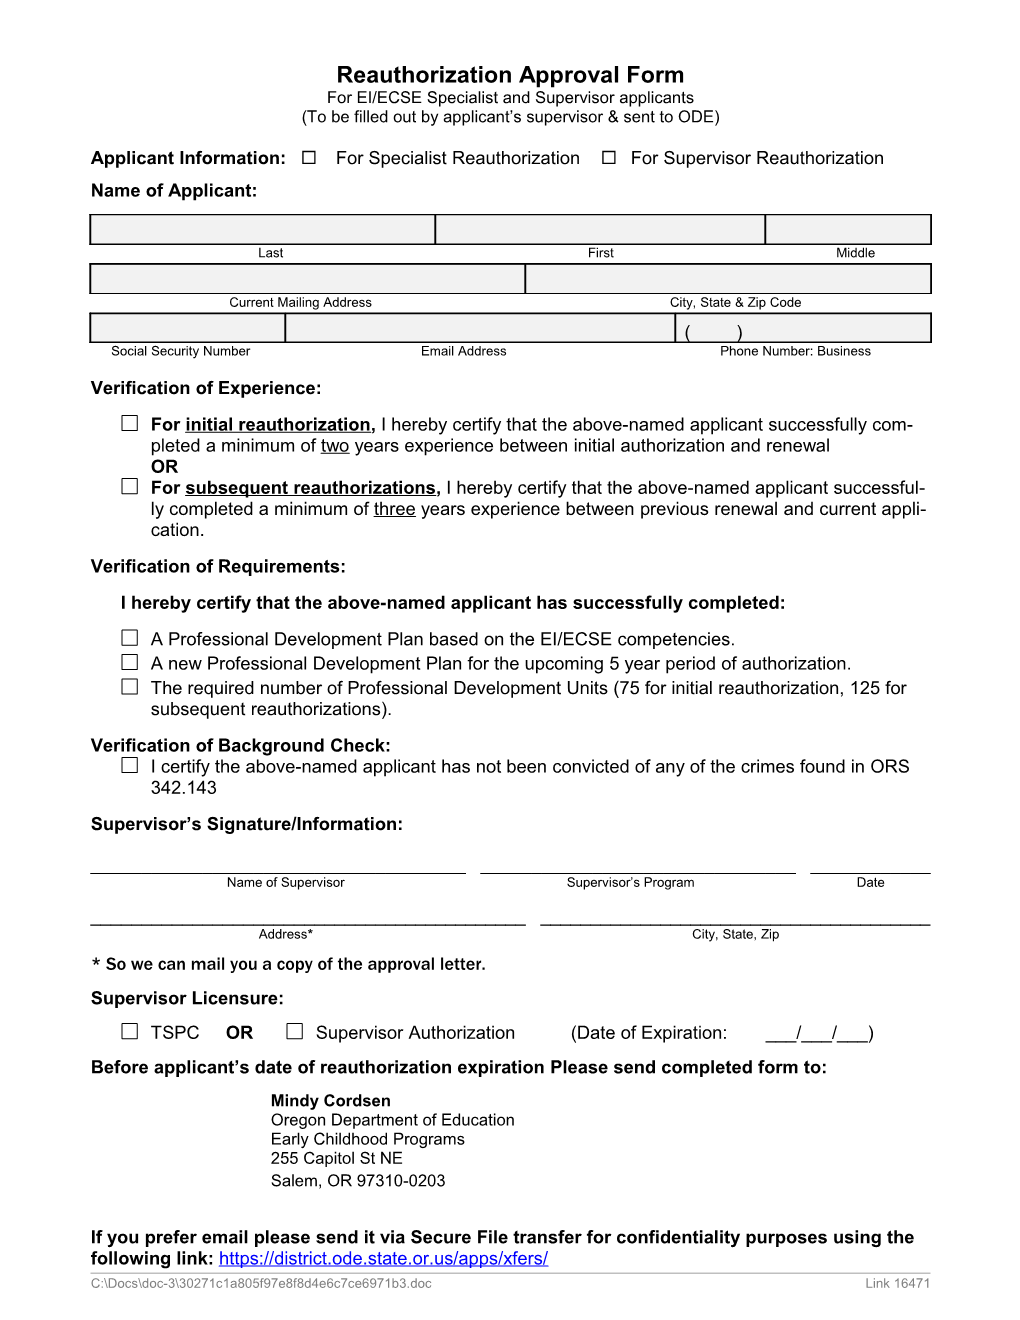 Reauthorization Approval Form